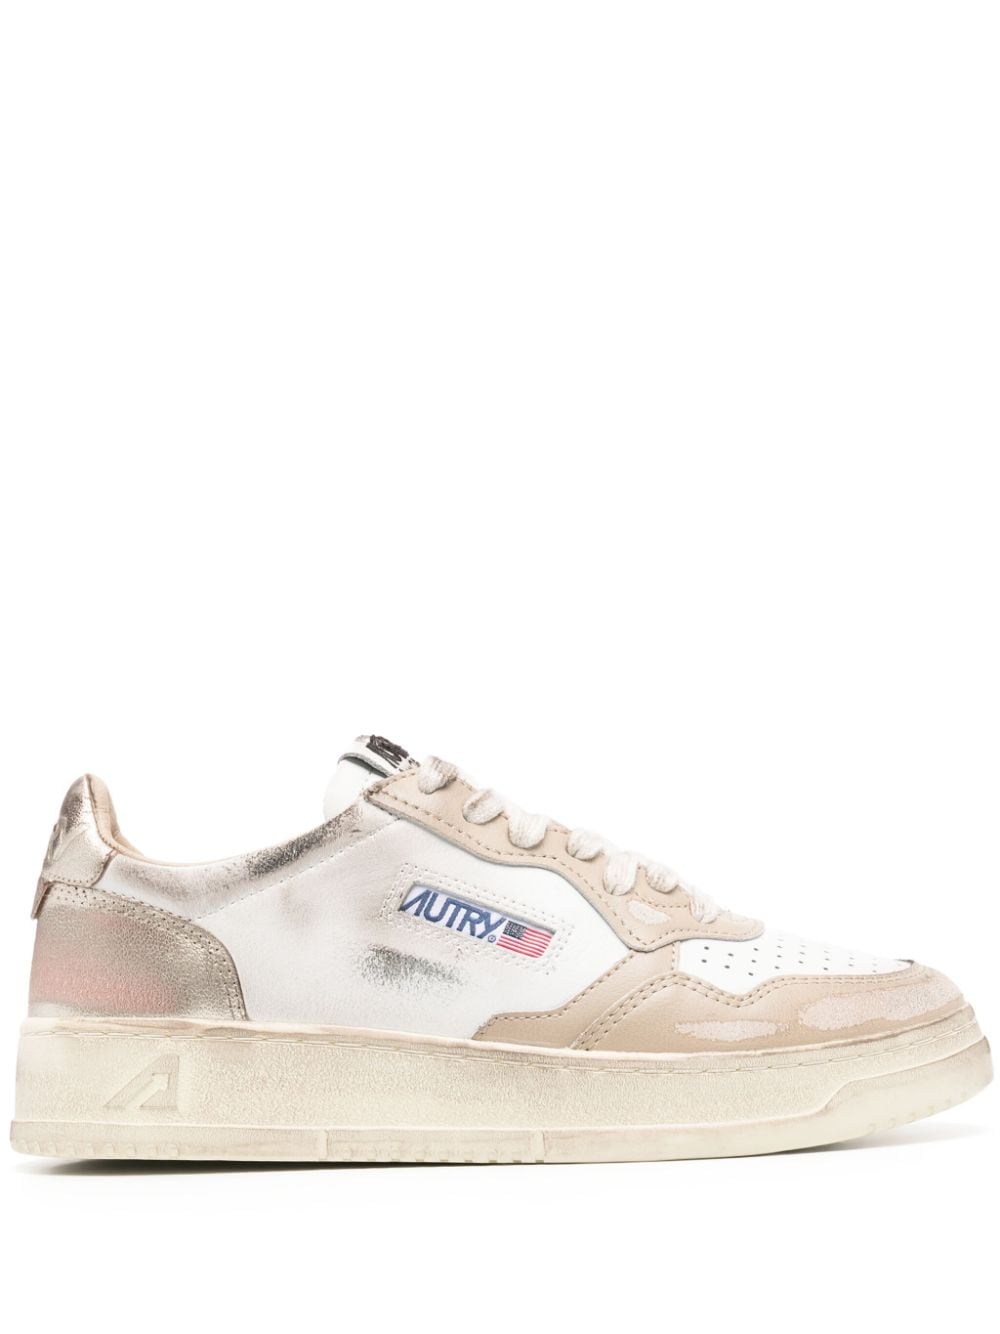 Autry Medalist distressed leather sneakers - White von Autry